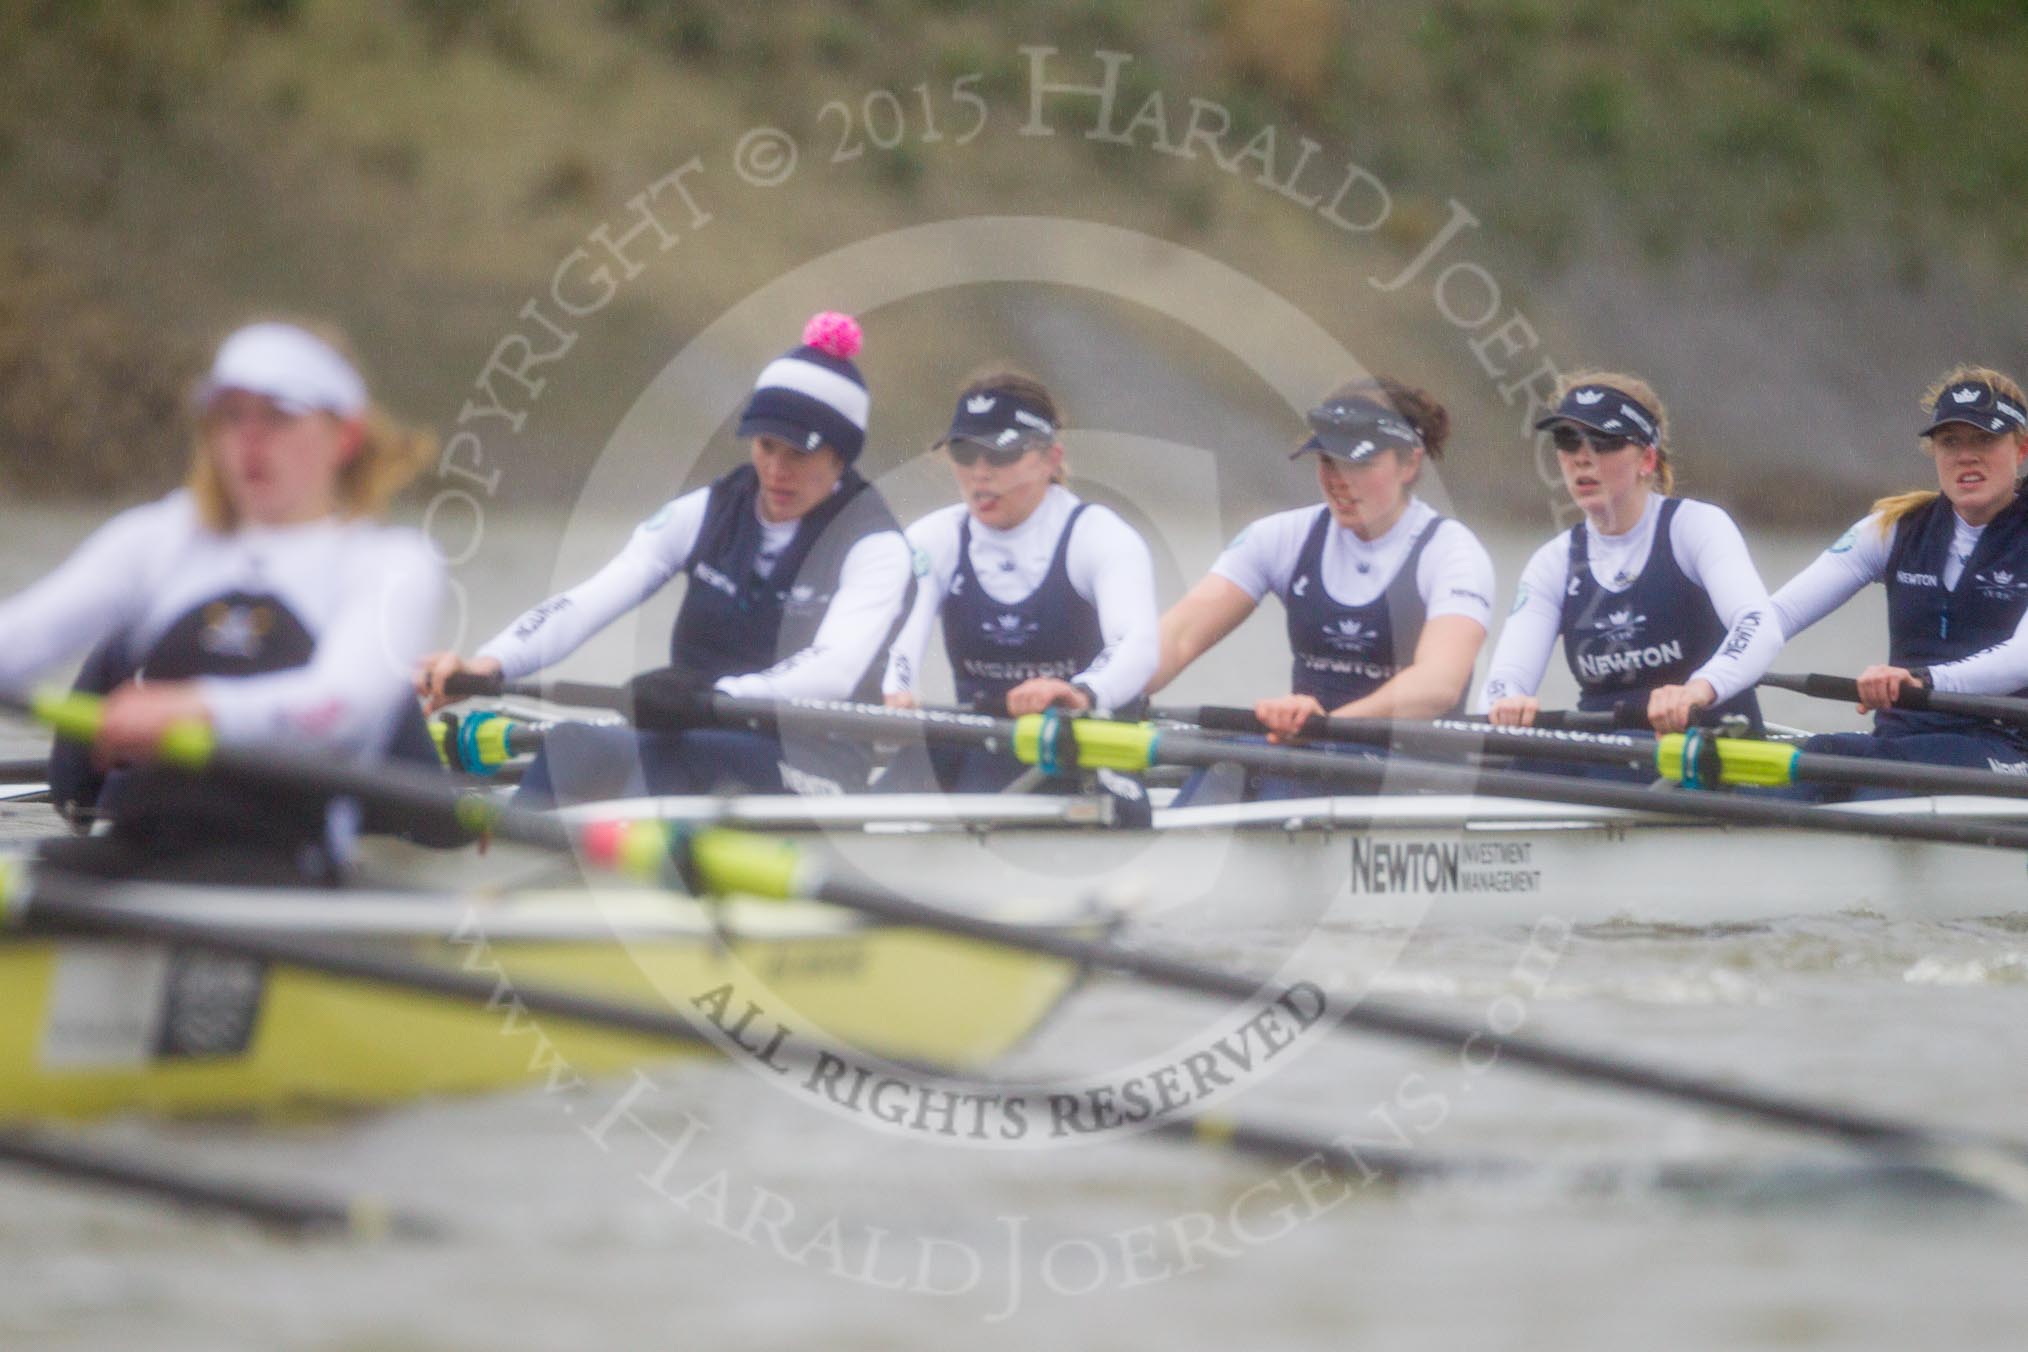 OUWBC during the third race - Caryn Davies, Nadine Gradel Iberg, Lauren Kedar, Amber De Vere, Emily Reynolds, with the Molesey BC Eight in the foreground